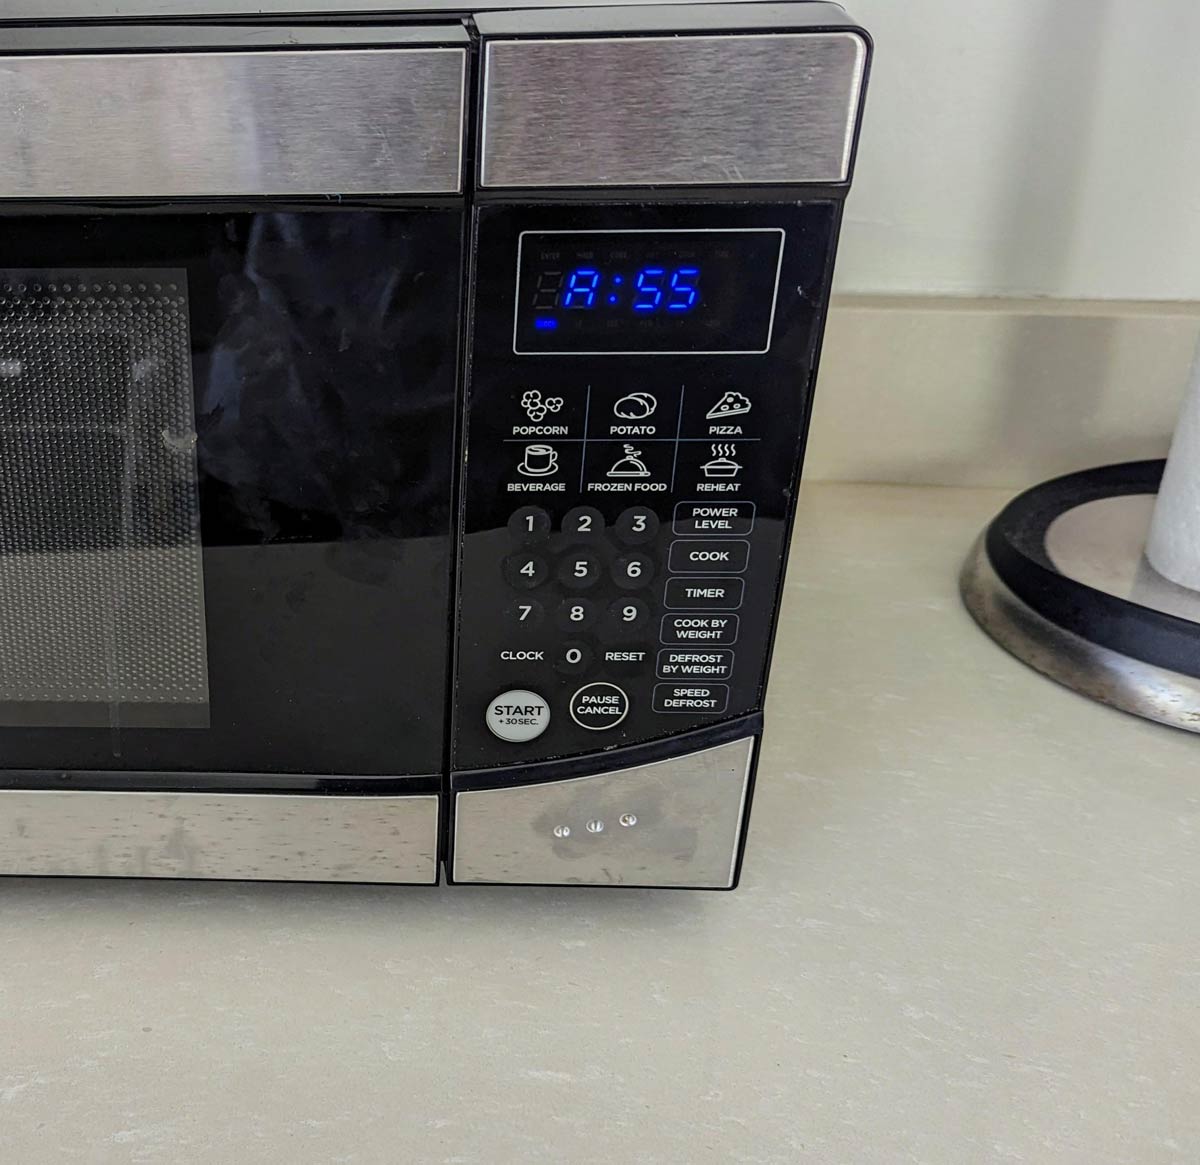 Why is my microwave so rude